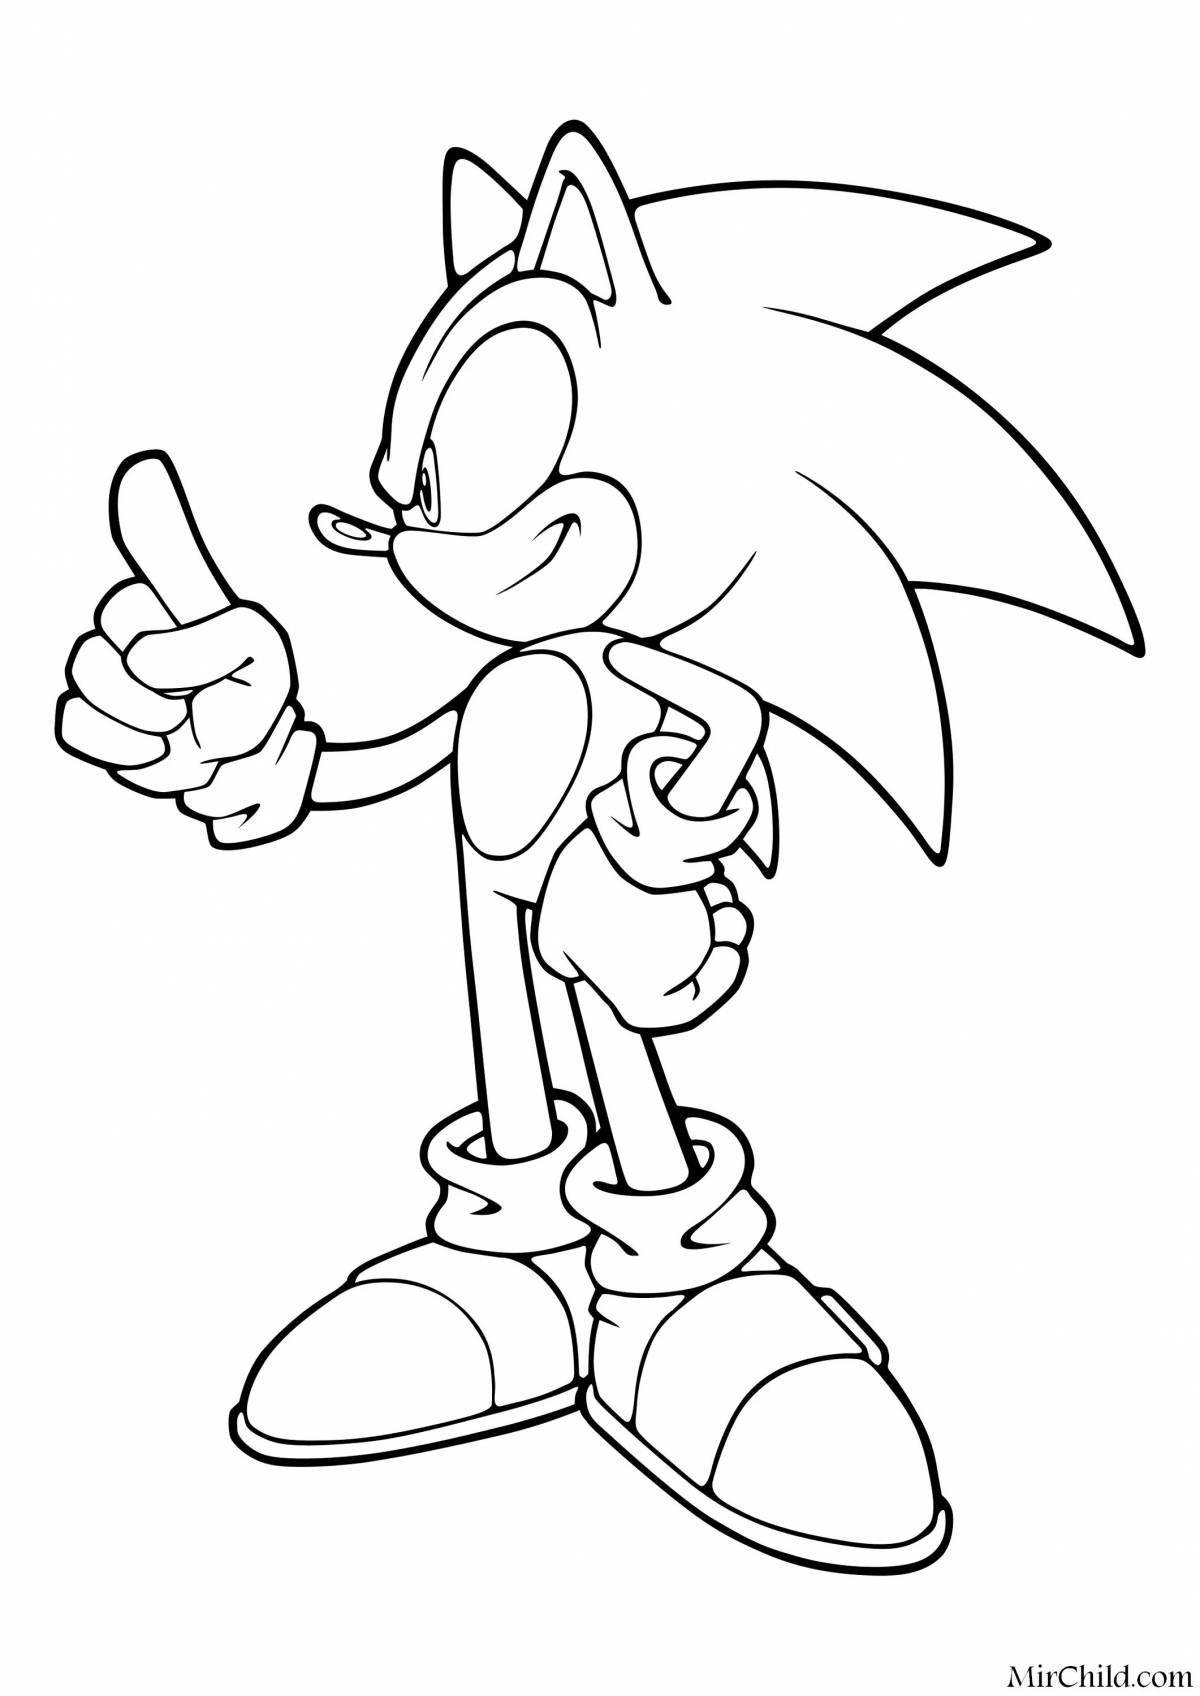 Mega sonic coloring page update